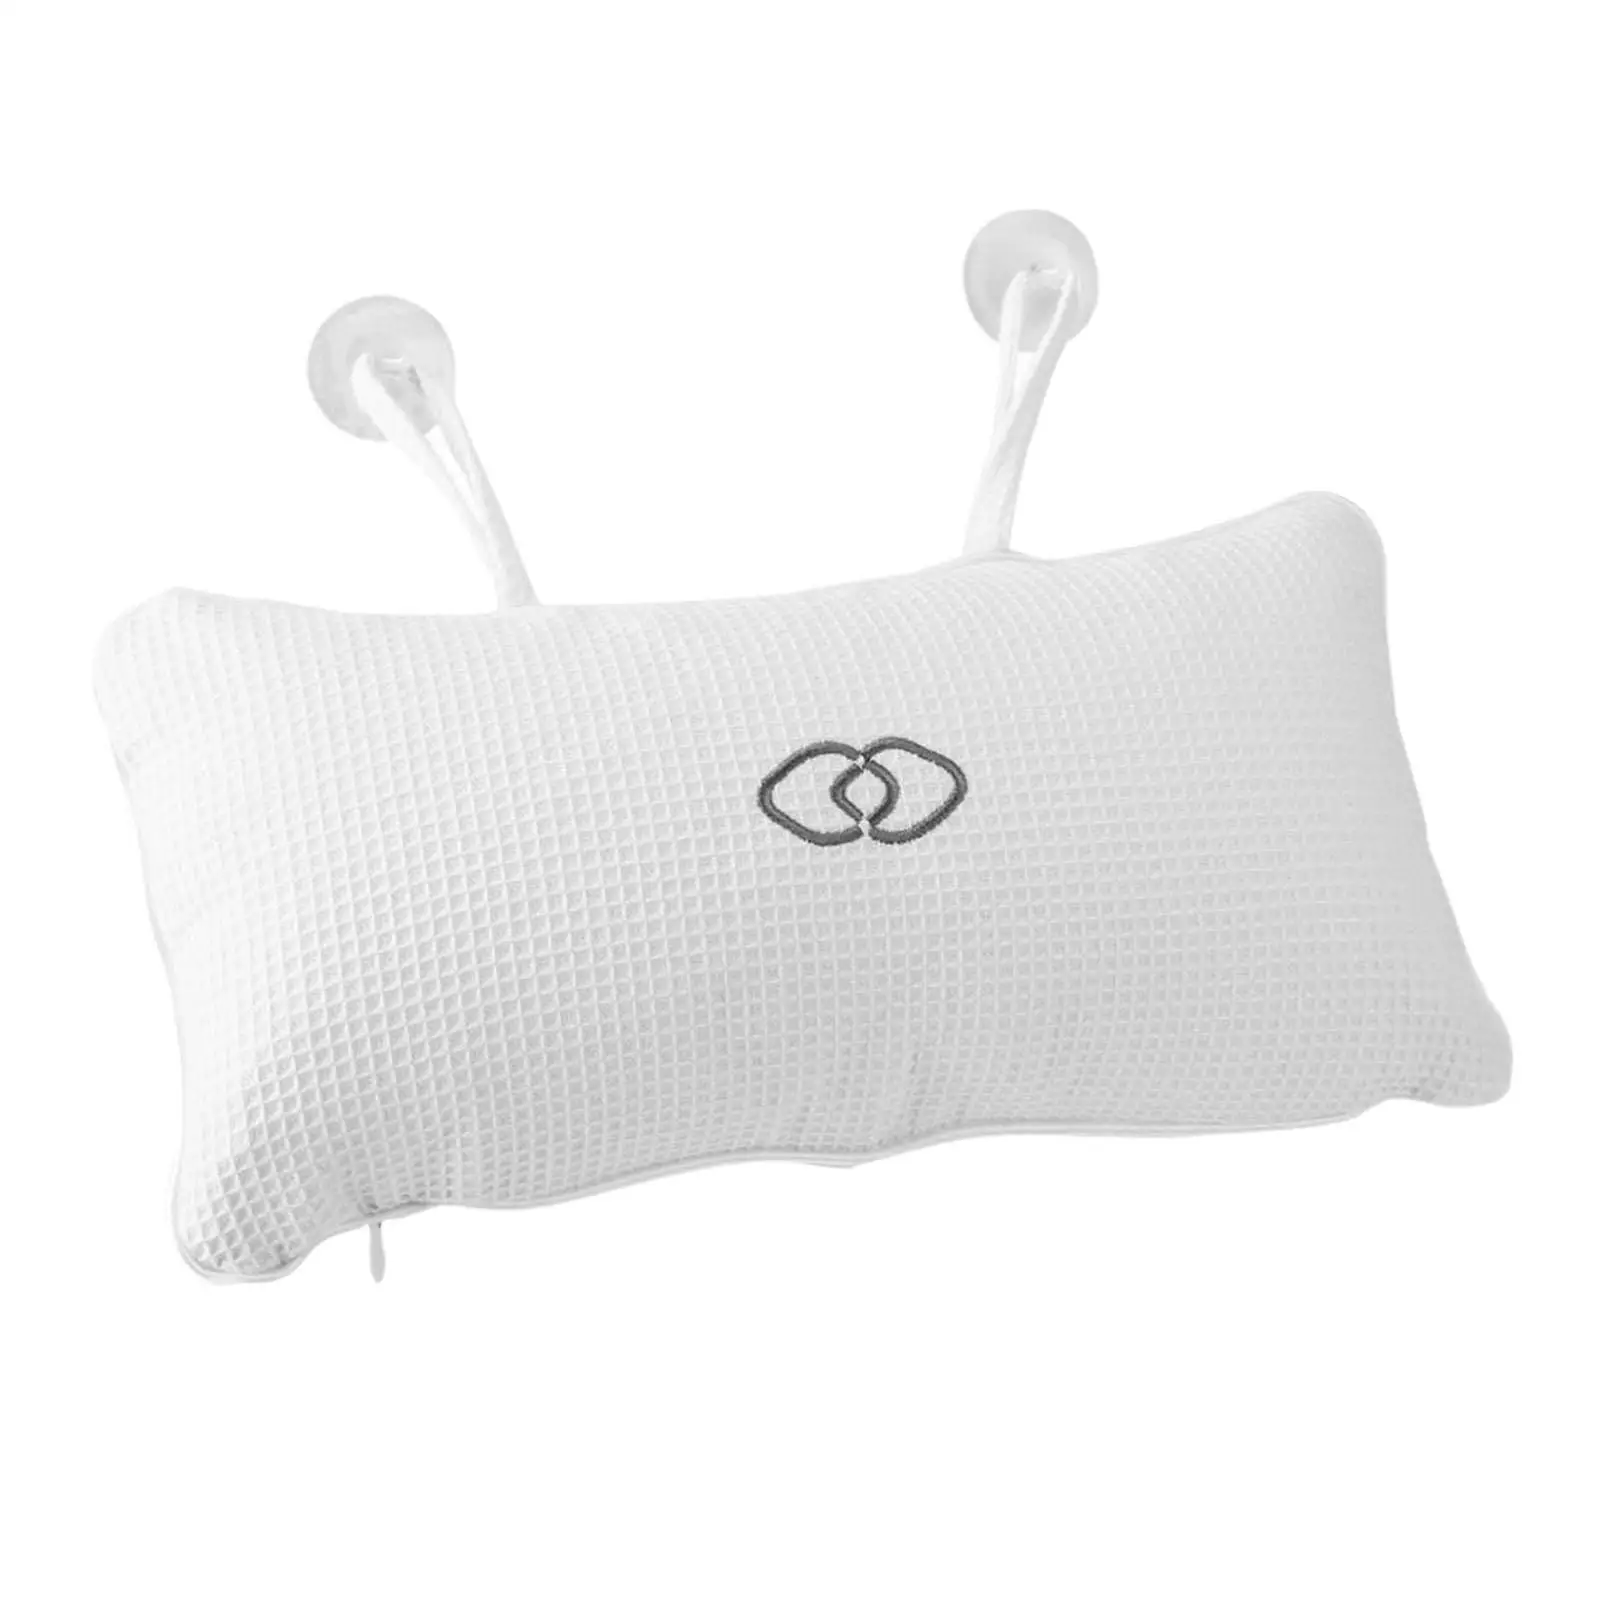  Pillow  in Luxury Fast Drying Bathtub  for Head, Neck and  & Tub Headrest Support Cushion